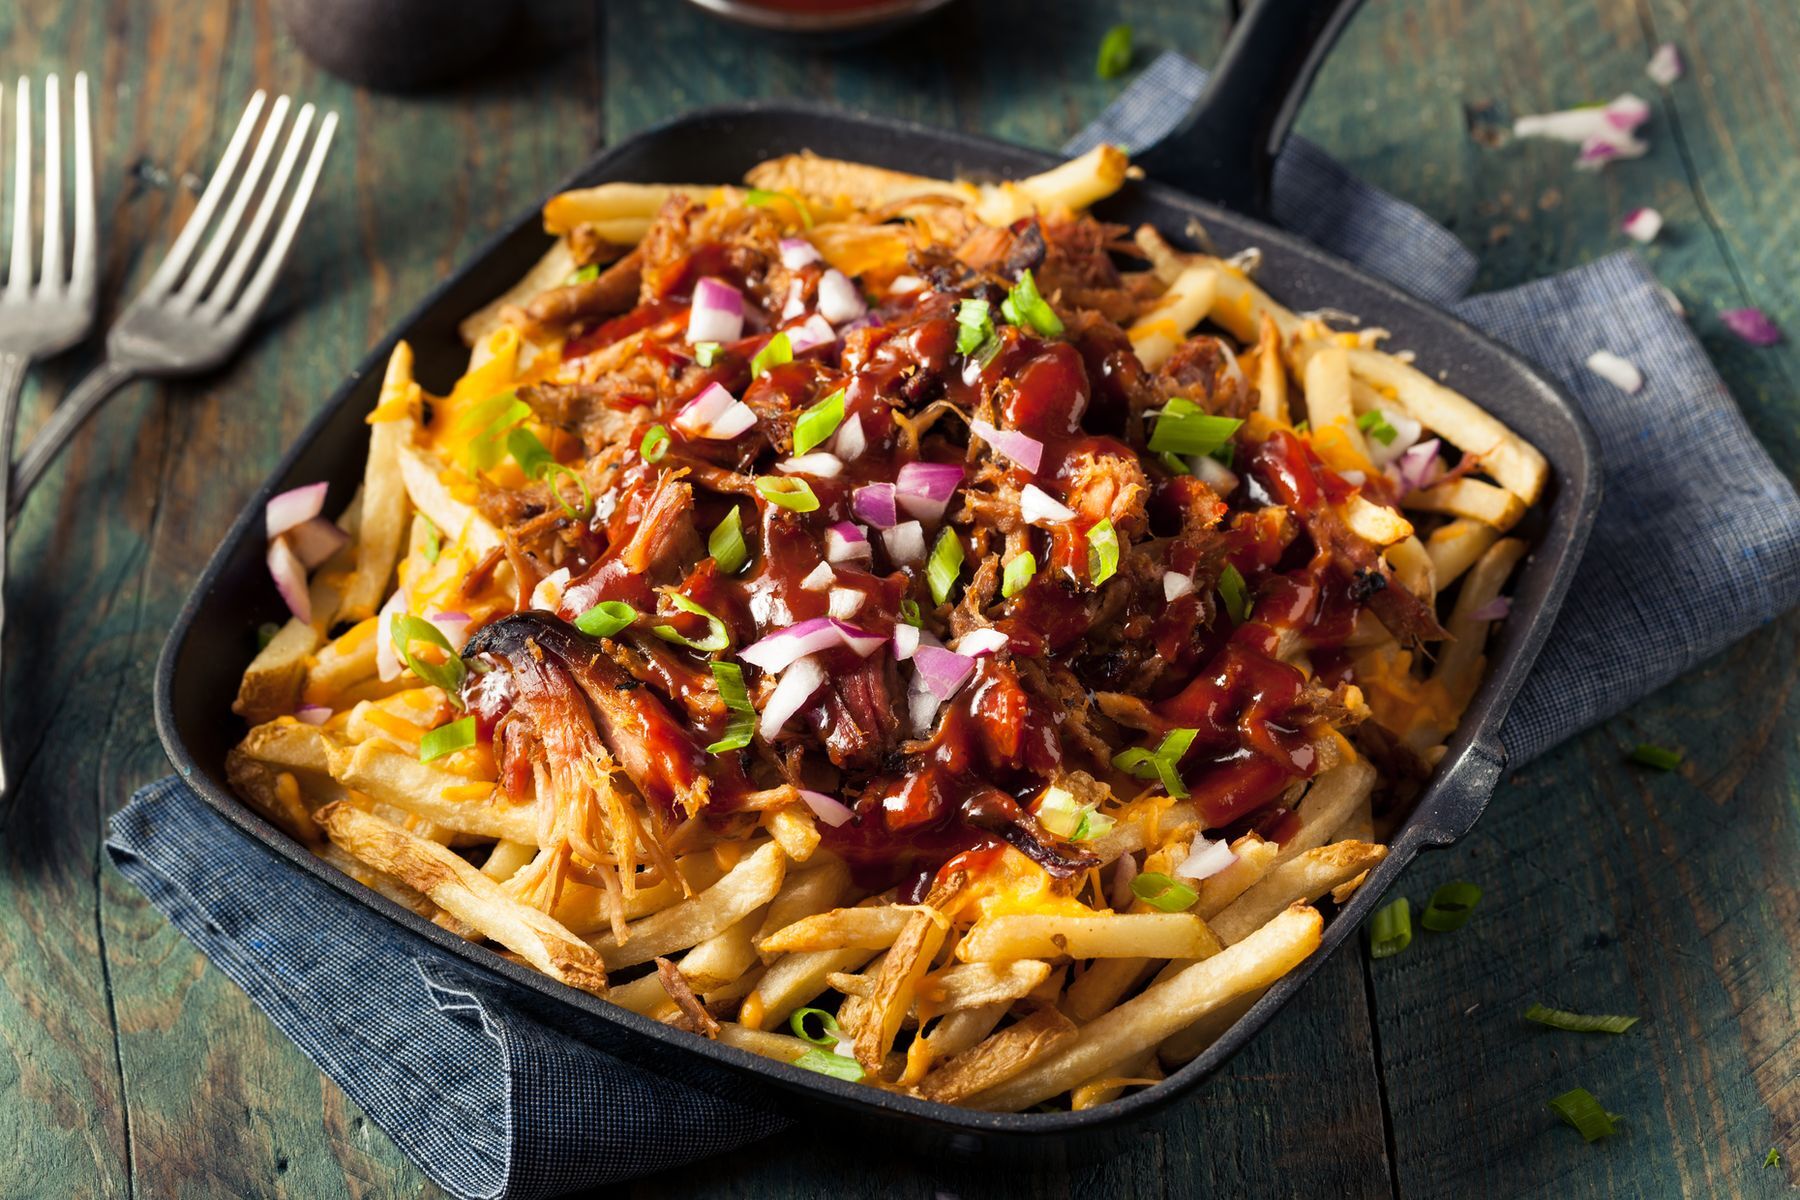 <p>Any fan of fries and meat will agree that this is <a href="https://tasty.co/recipe/bbq-pulled-pork-fries">one of the best combos ever</a>. A real flavour explosion in your mouth!</p>